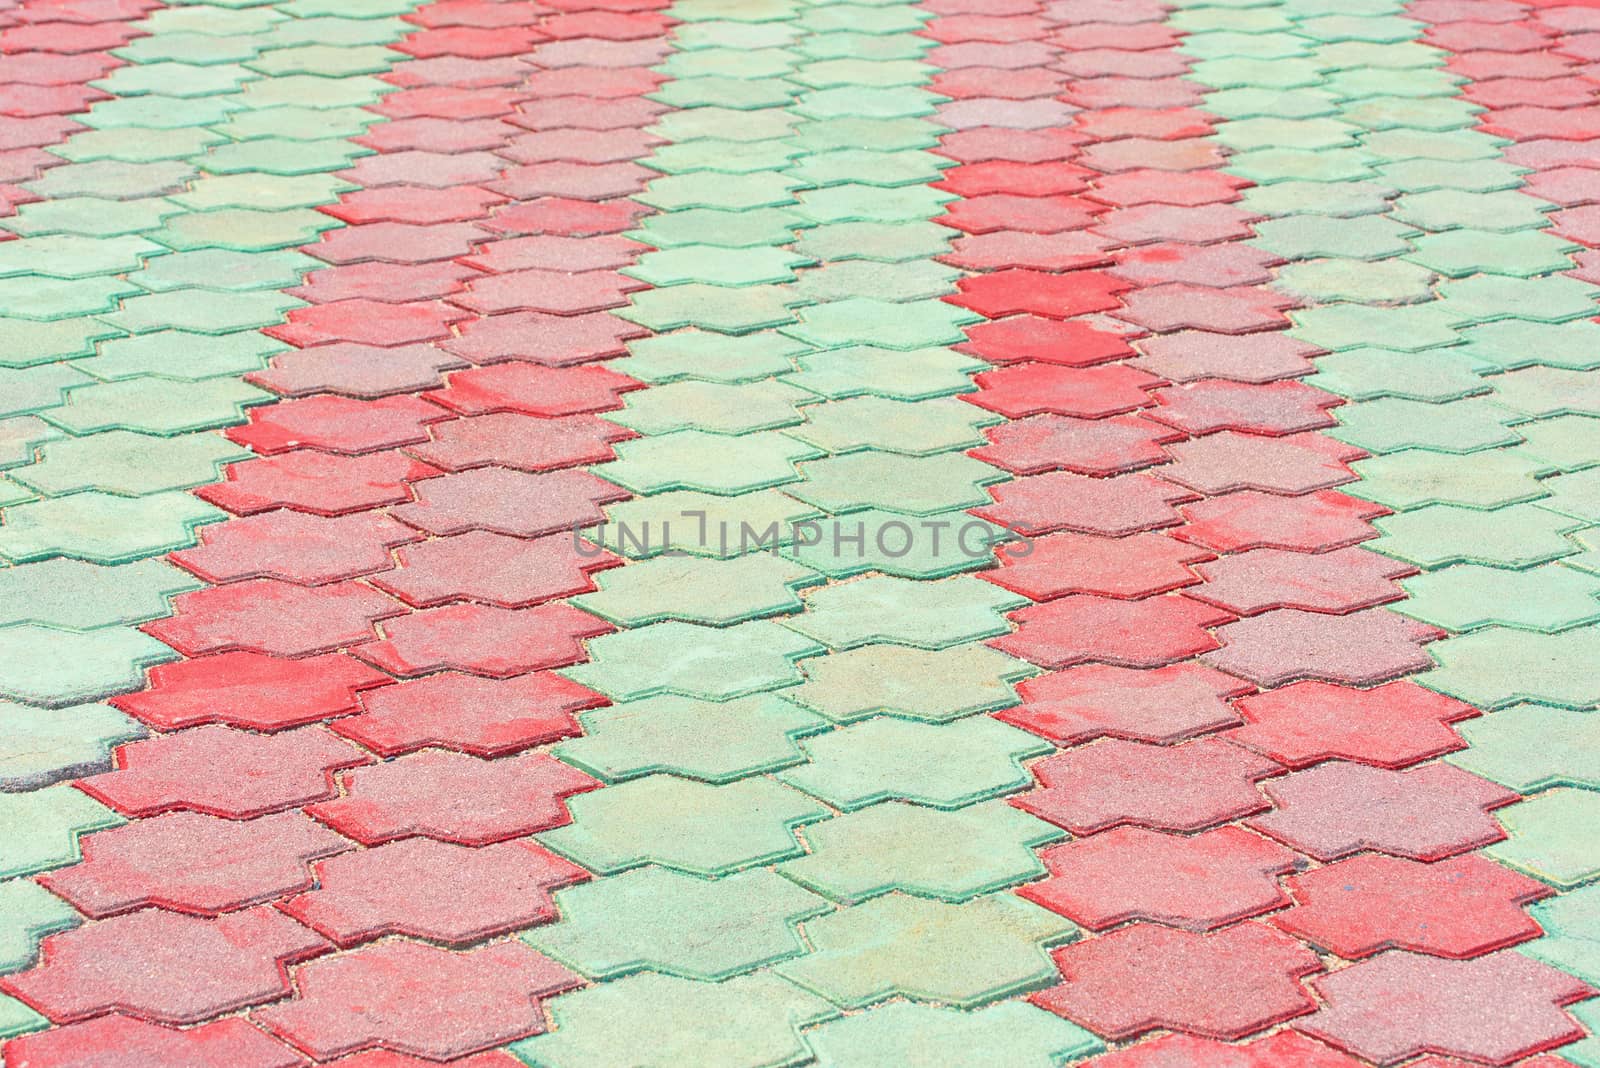 Stone pavement in perspective. Stone pavement texture. Red and green paving stones